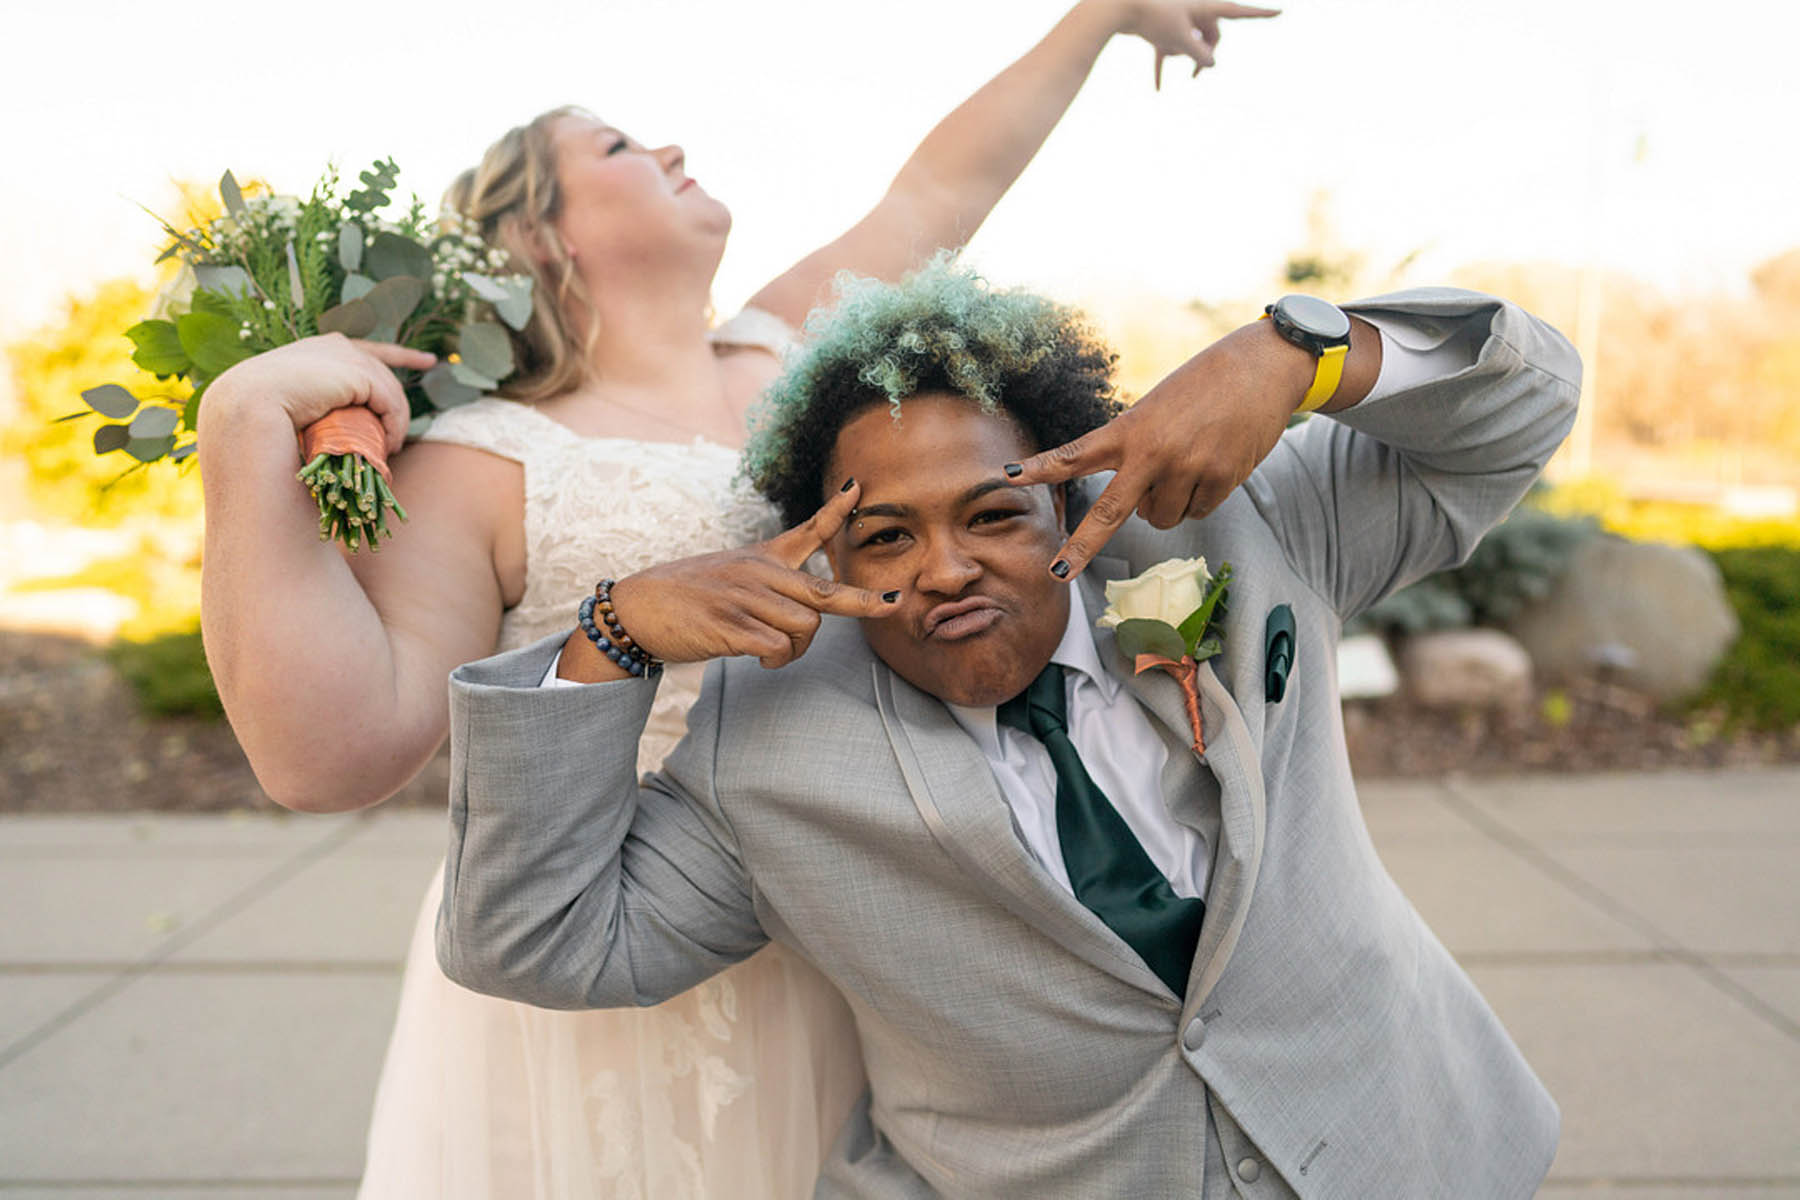 A white woman in a white gown stands behind a black person in a gray suit with green hair, striking a funny and expressive pose. 